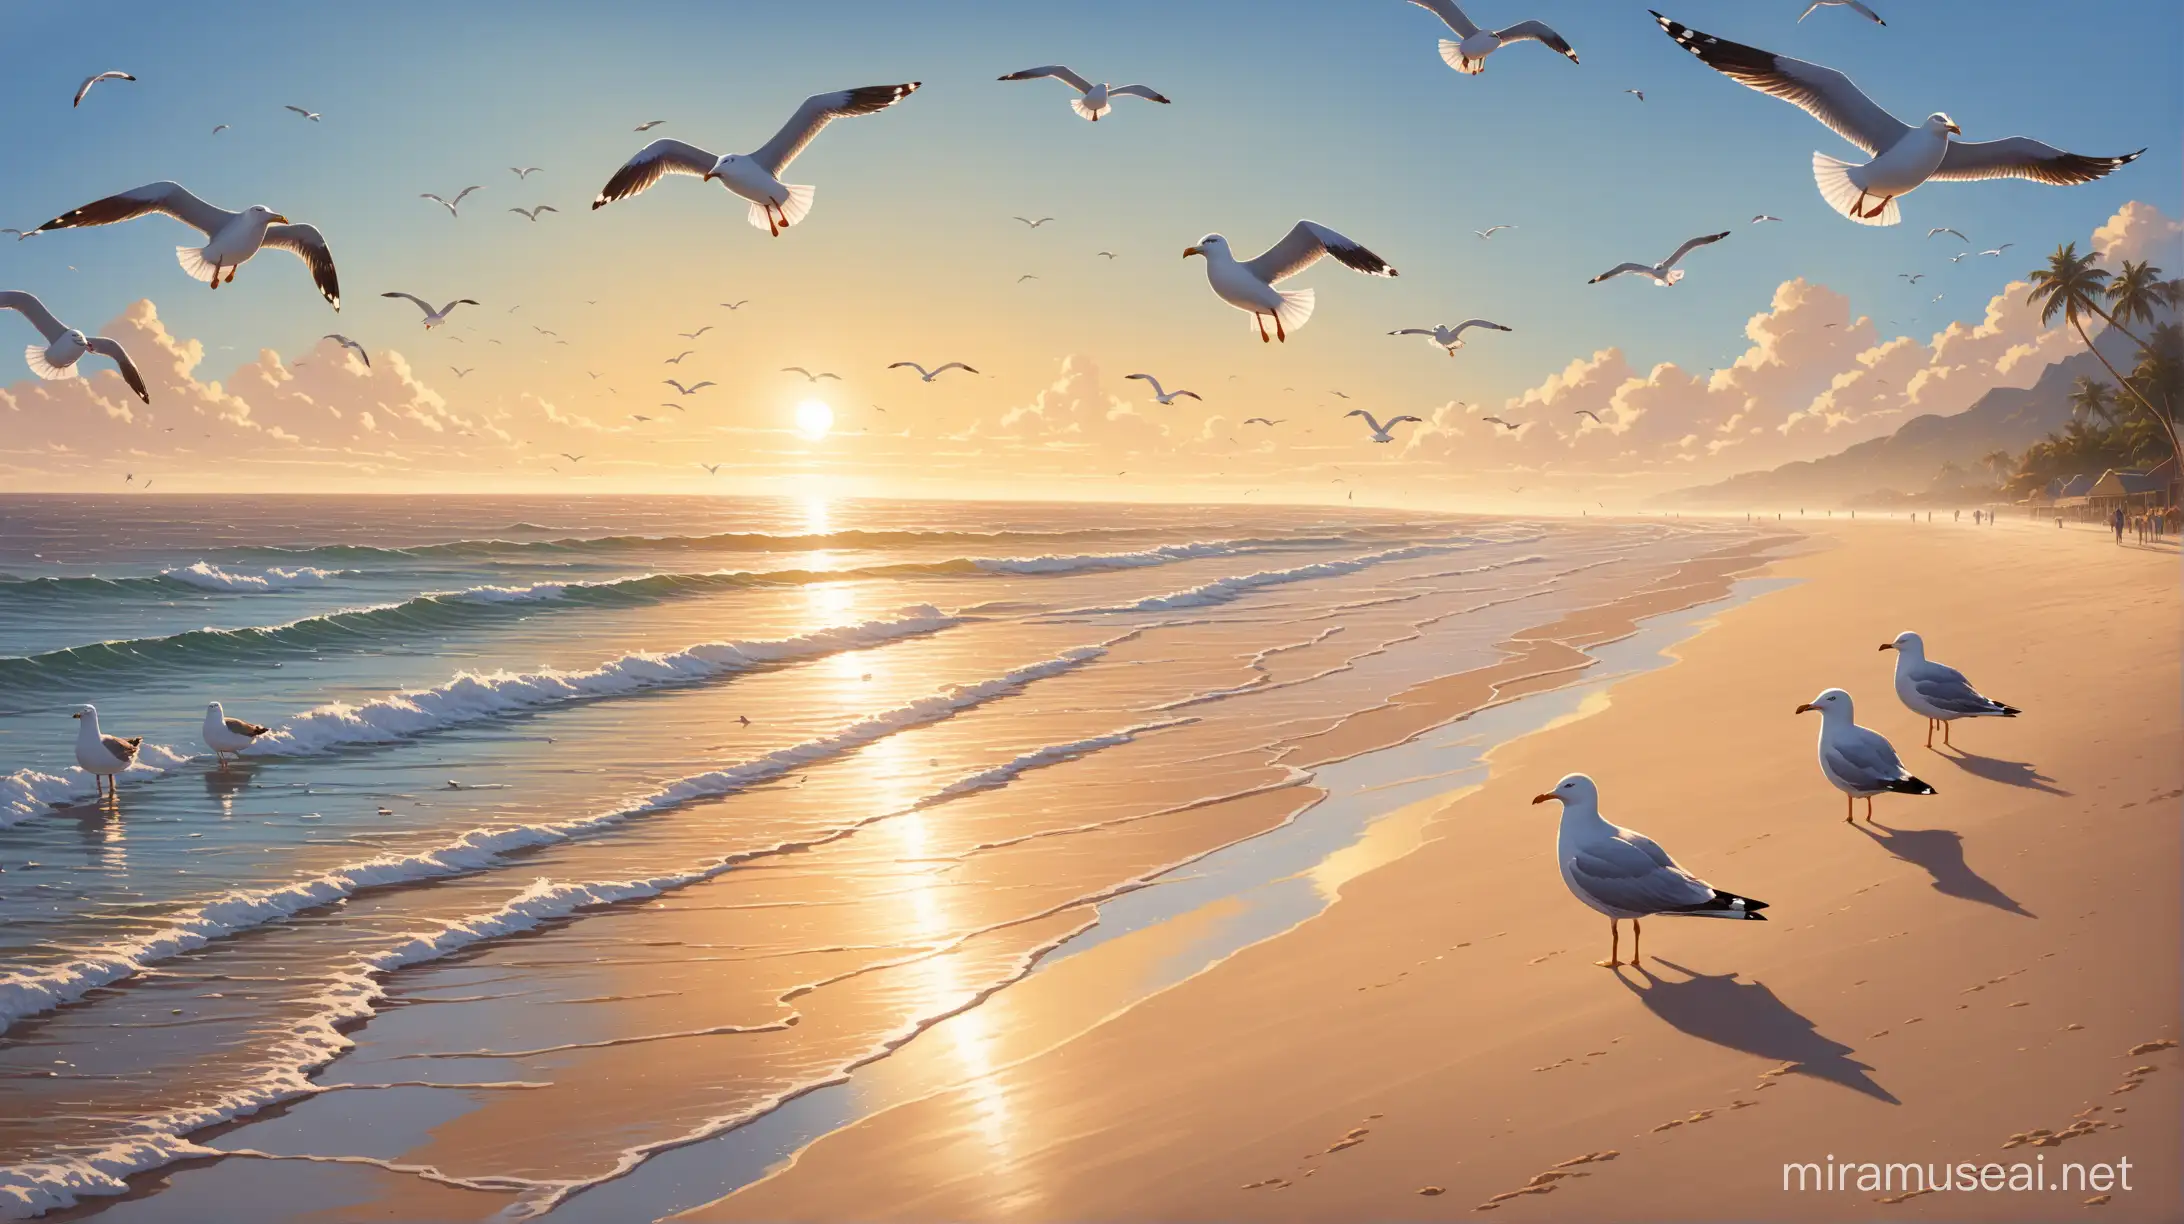 ((highly detailed)), ((best quality)), ((high quality)), ((morning)),  ((beach)), ((seagulls walking about)), ((birds))